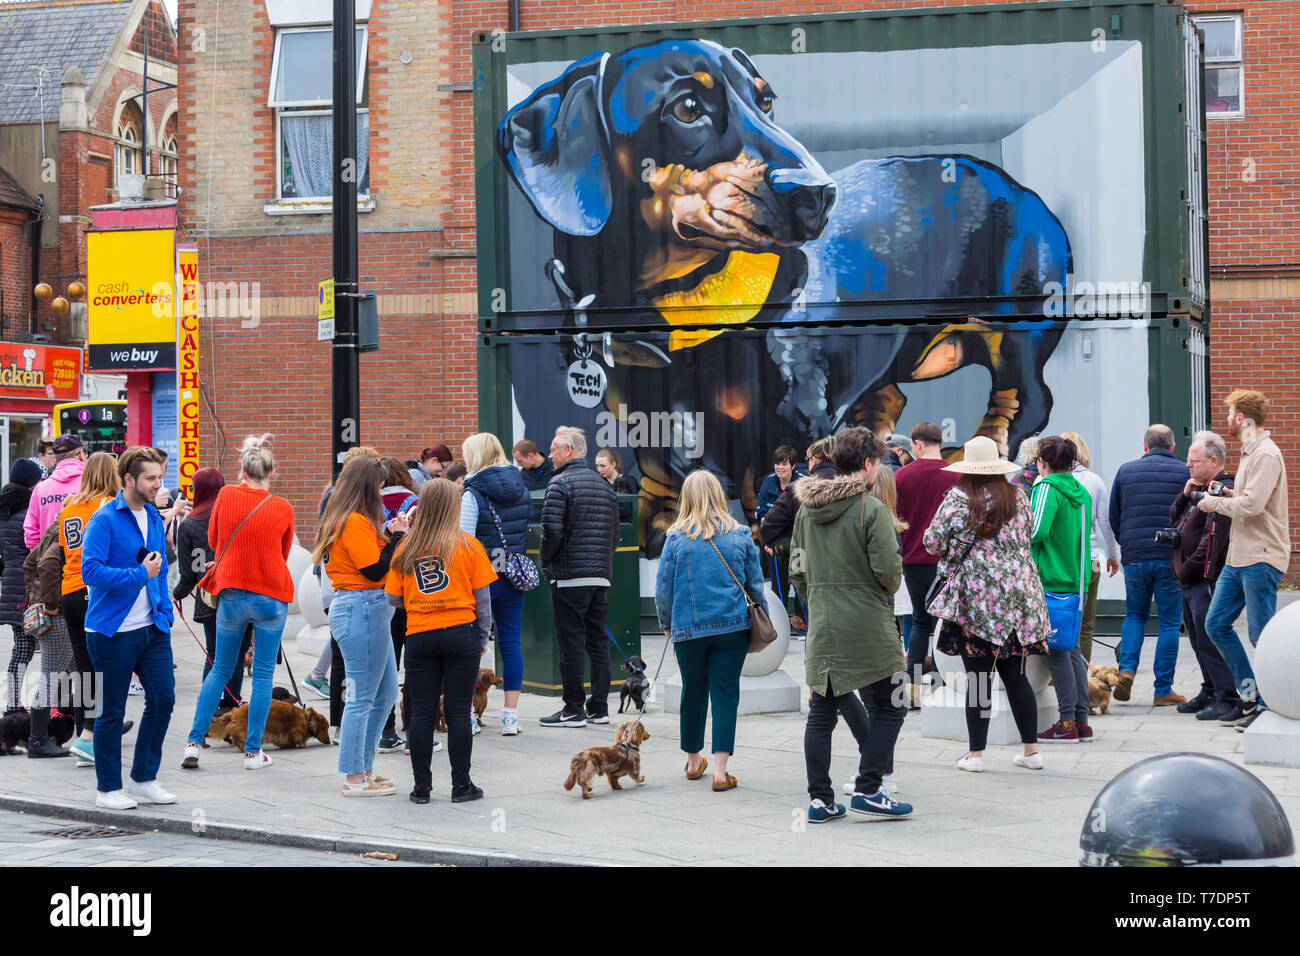 Boscombe, Bournemouth, Dorset, UK. 6th May, 2019. Dachshund Dash, part of Bournemouth Emerging Arts Fringe (BEAF) Festival invites dachshunds and their owners to gather under the Daschund artwork to see how many they can gather in one place. Credit: Carolyn Jenkins/Alamy Live News Stock Photo